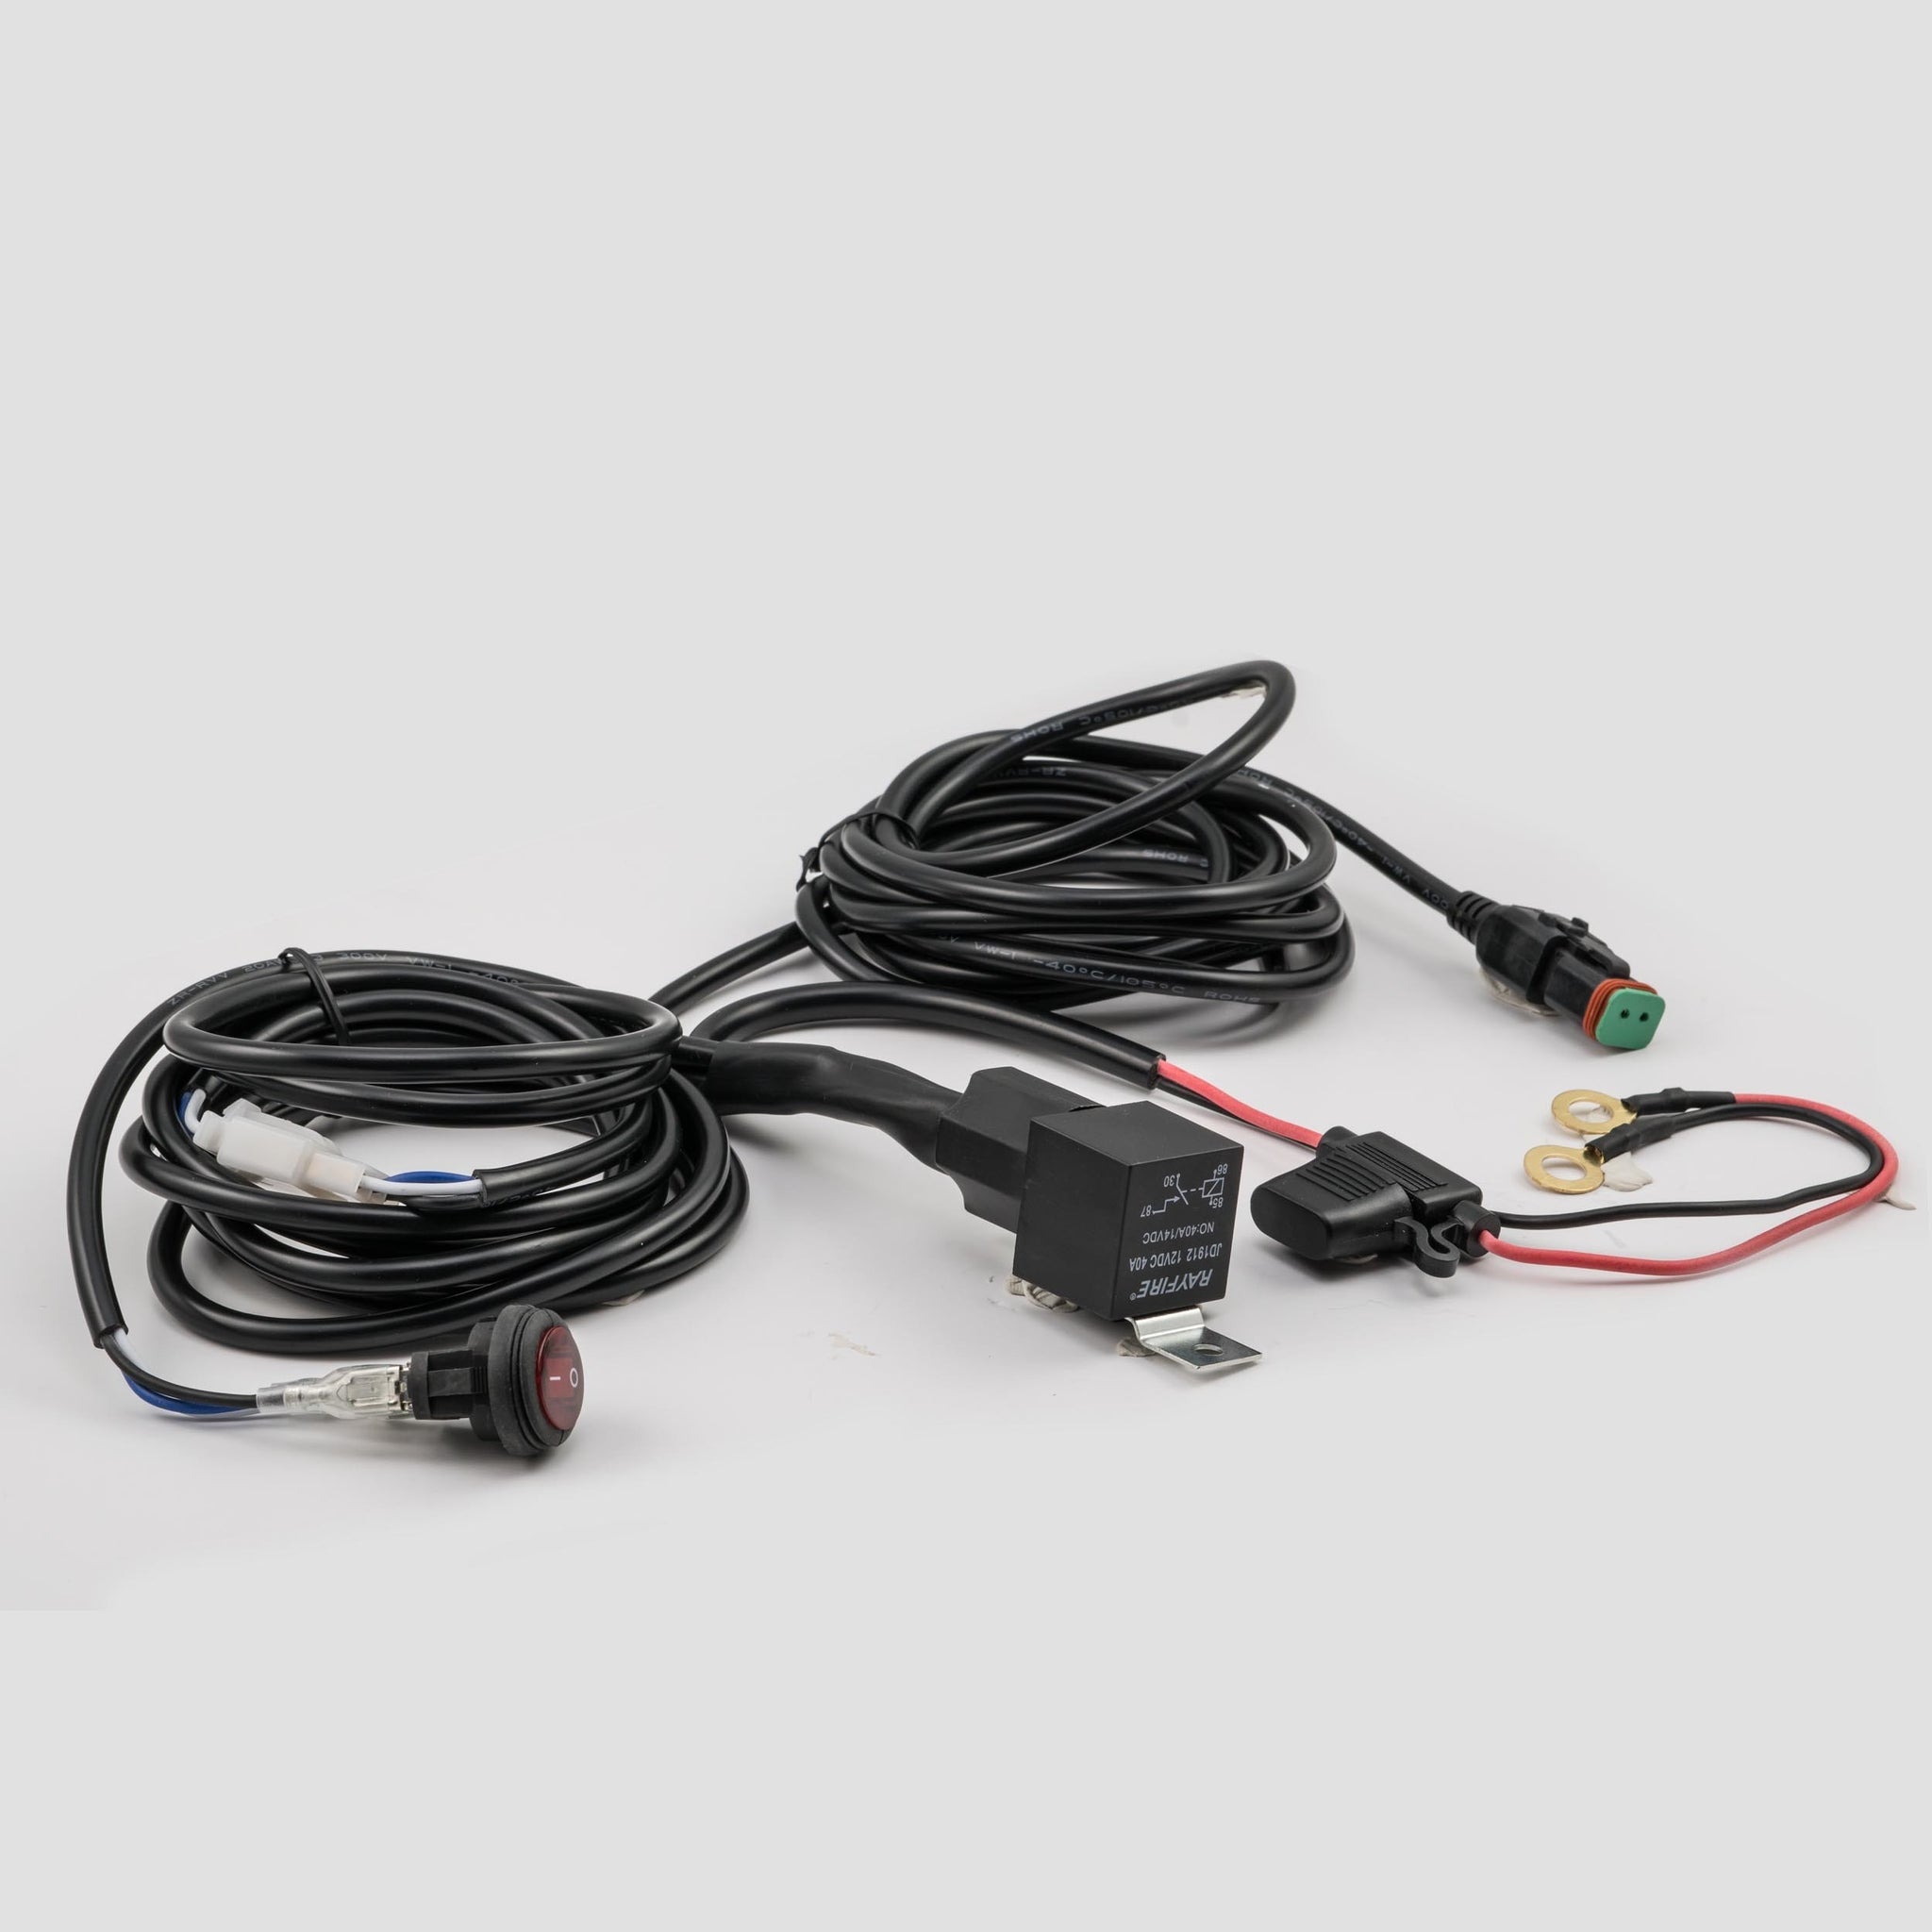 Heise HE-SLWH1 DT Wiring Harness and Switch Kit - 1 Lamp, Universal